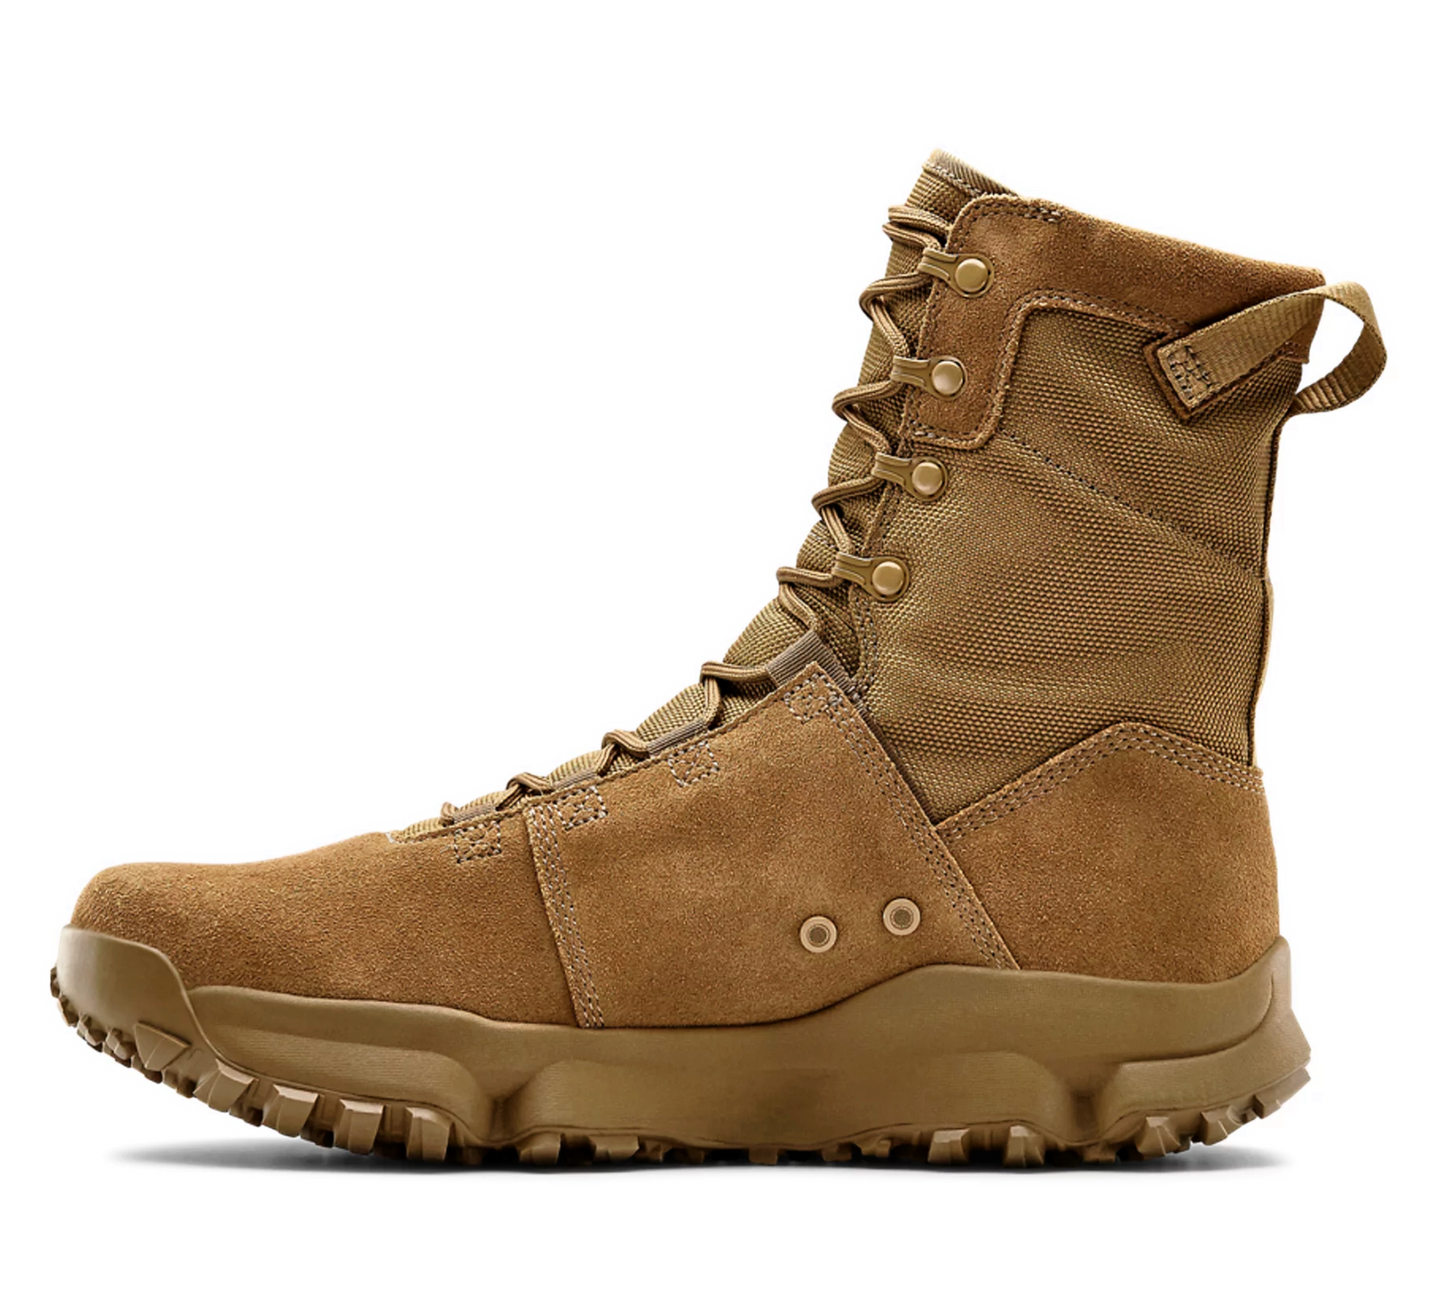 Under Armour Tac Loadout Coyote Leather Military Boots